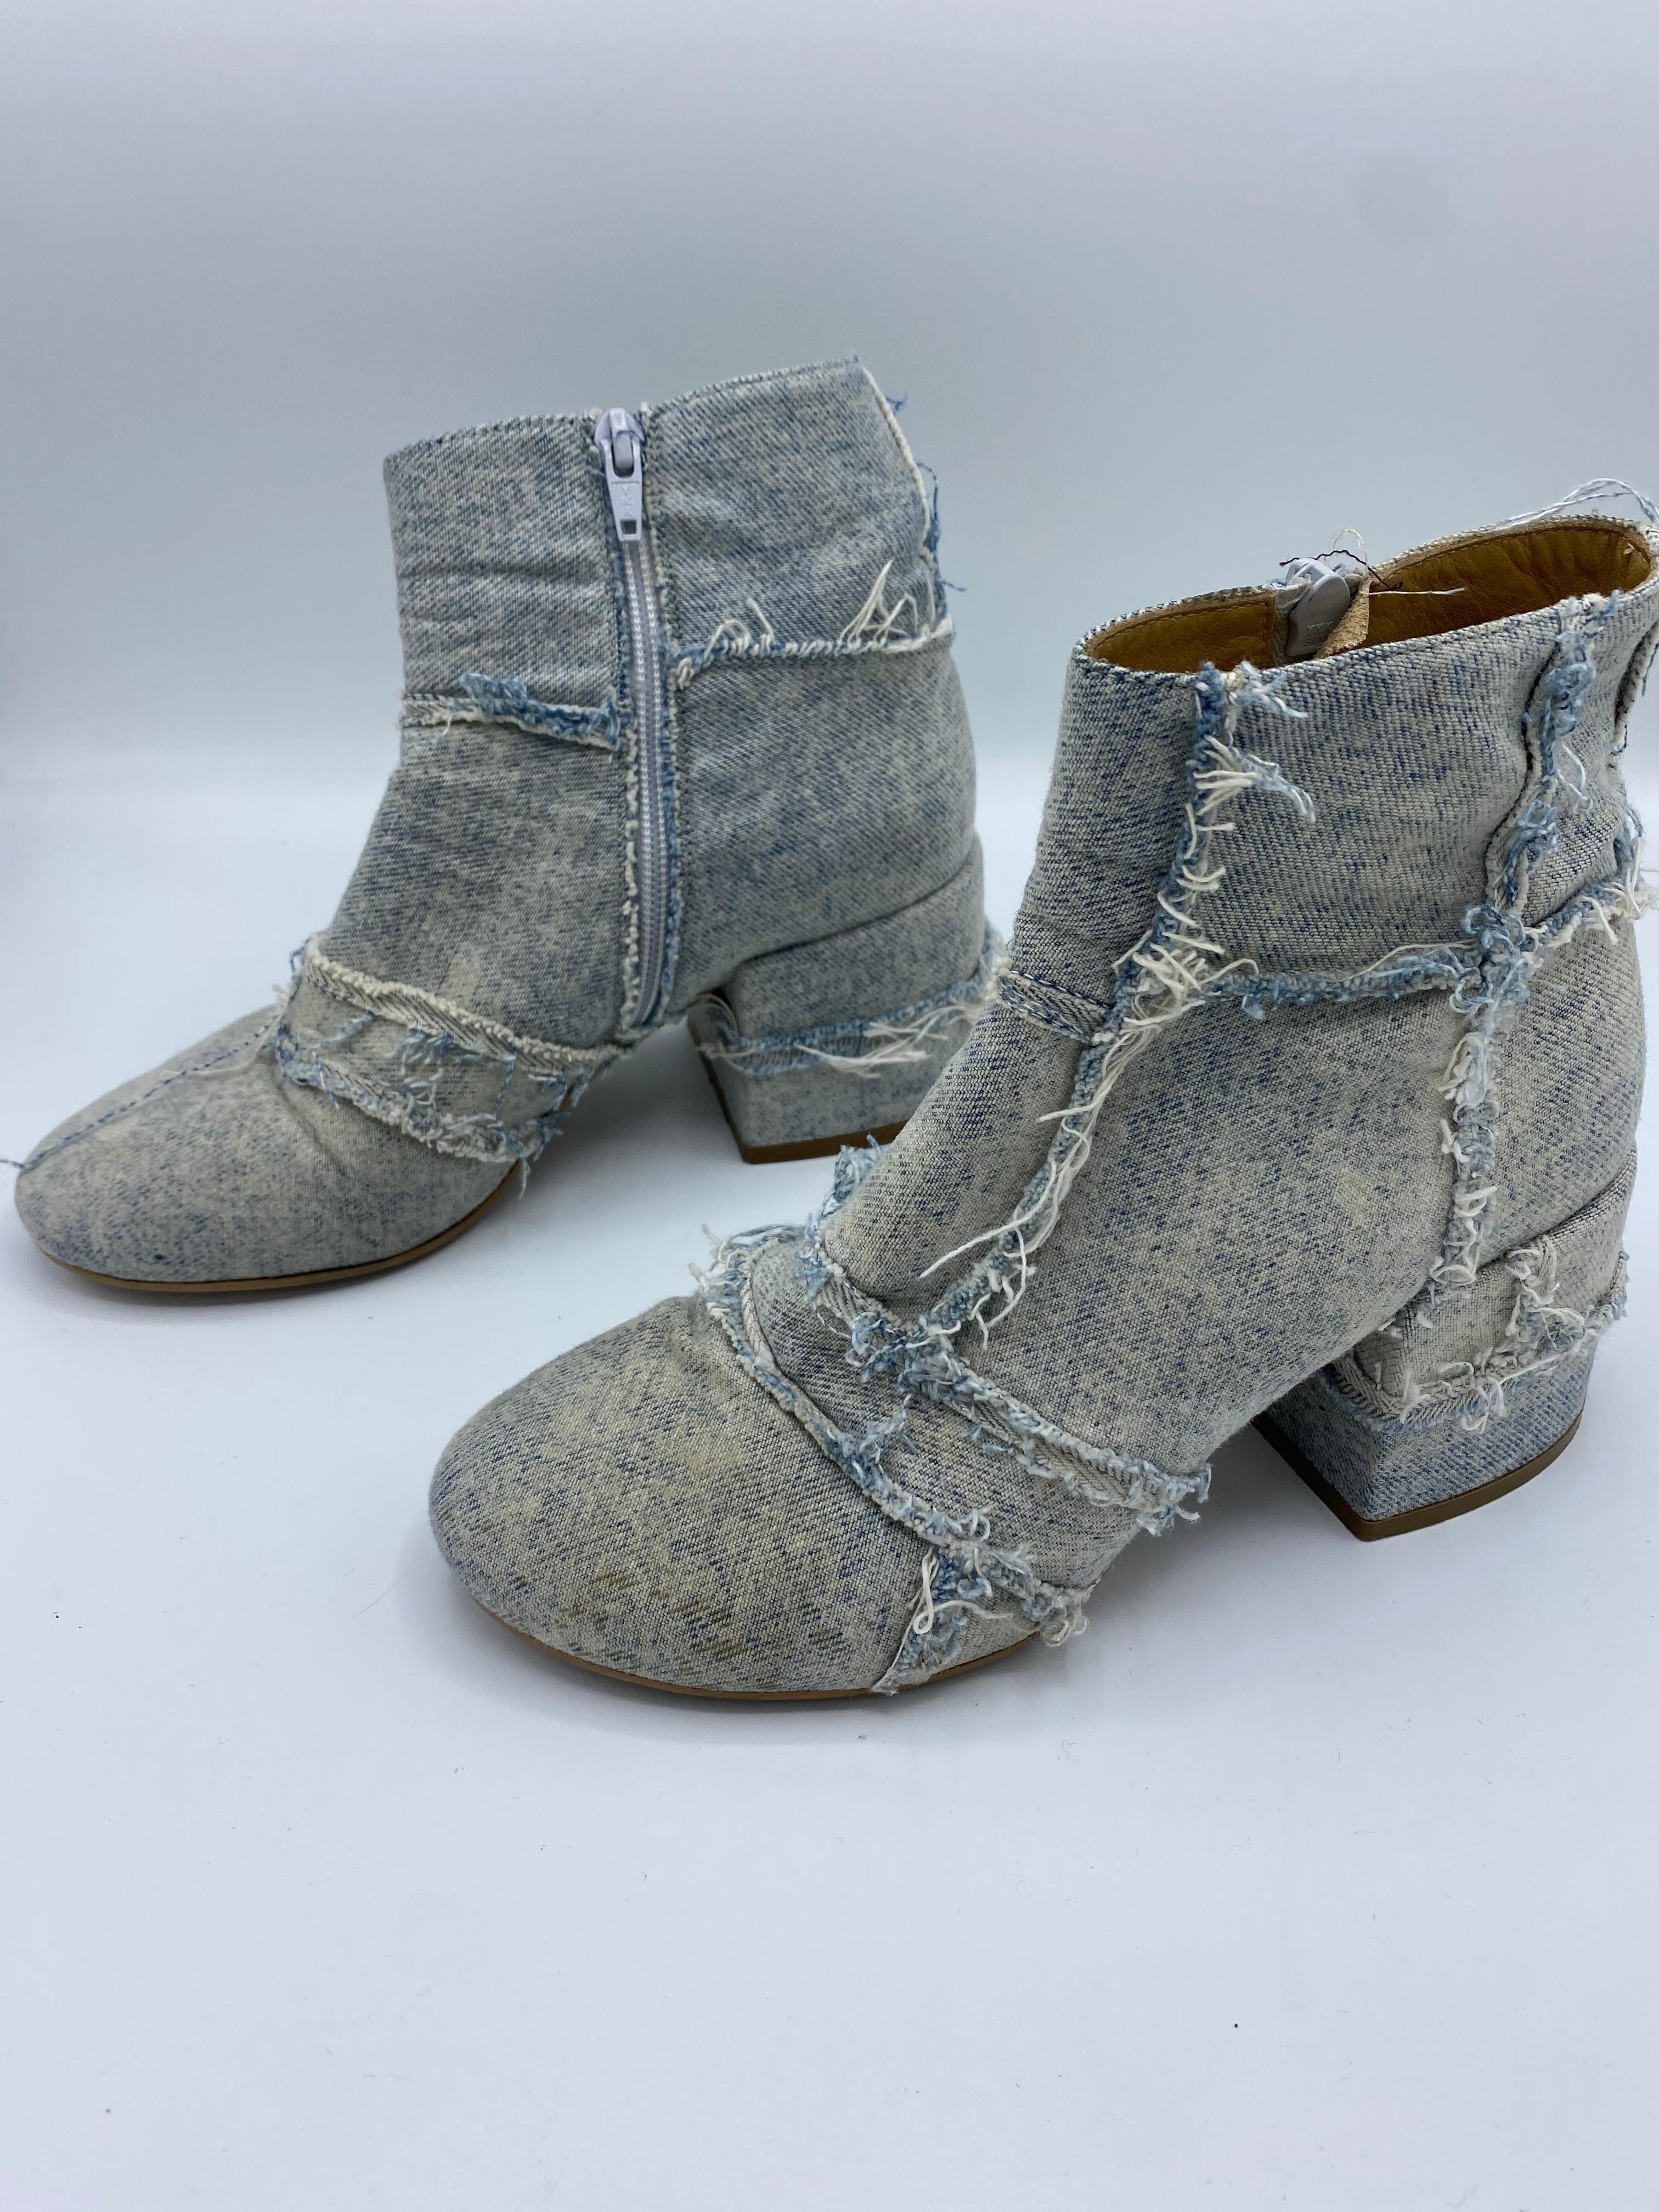 Product details:

The boots feature light wash denim, zip closure and low wide heel, heel height is 3 inches. Made in Italy.